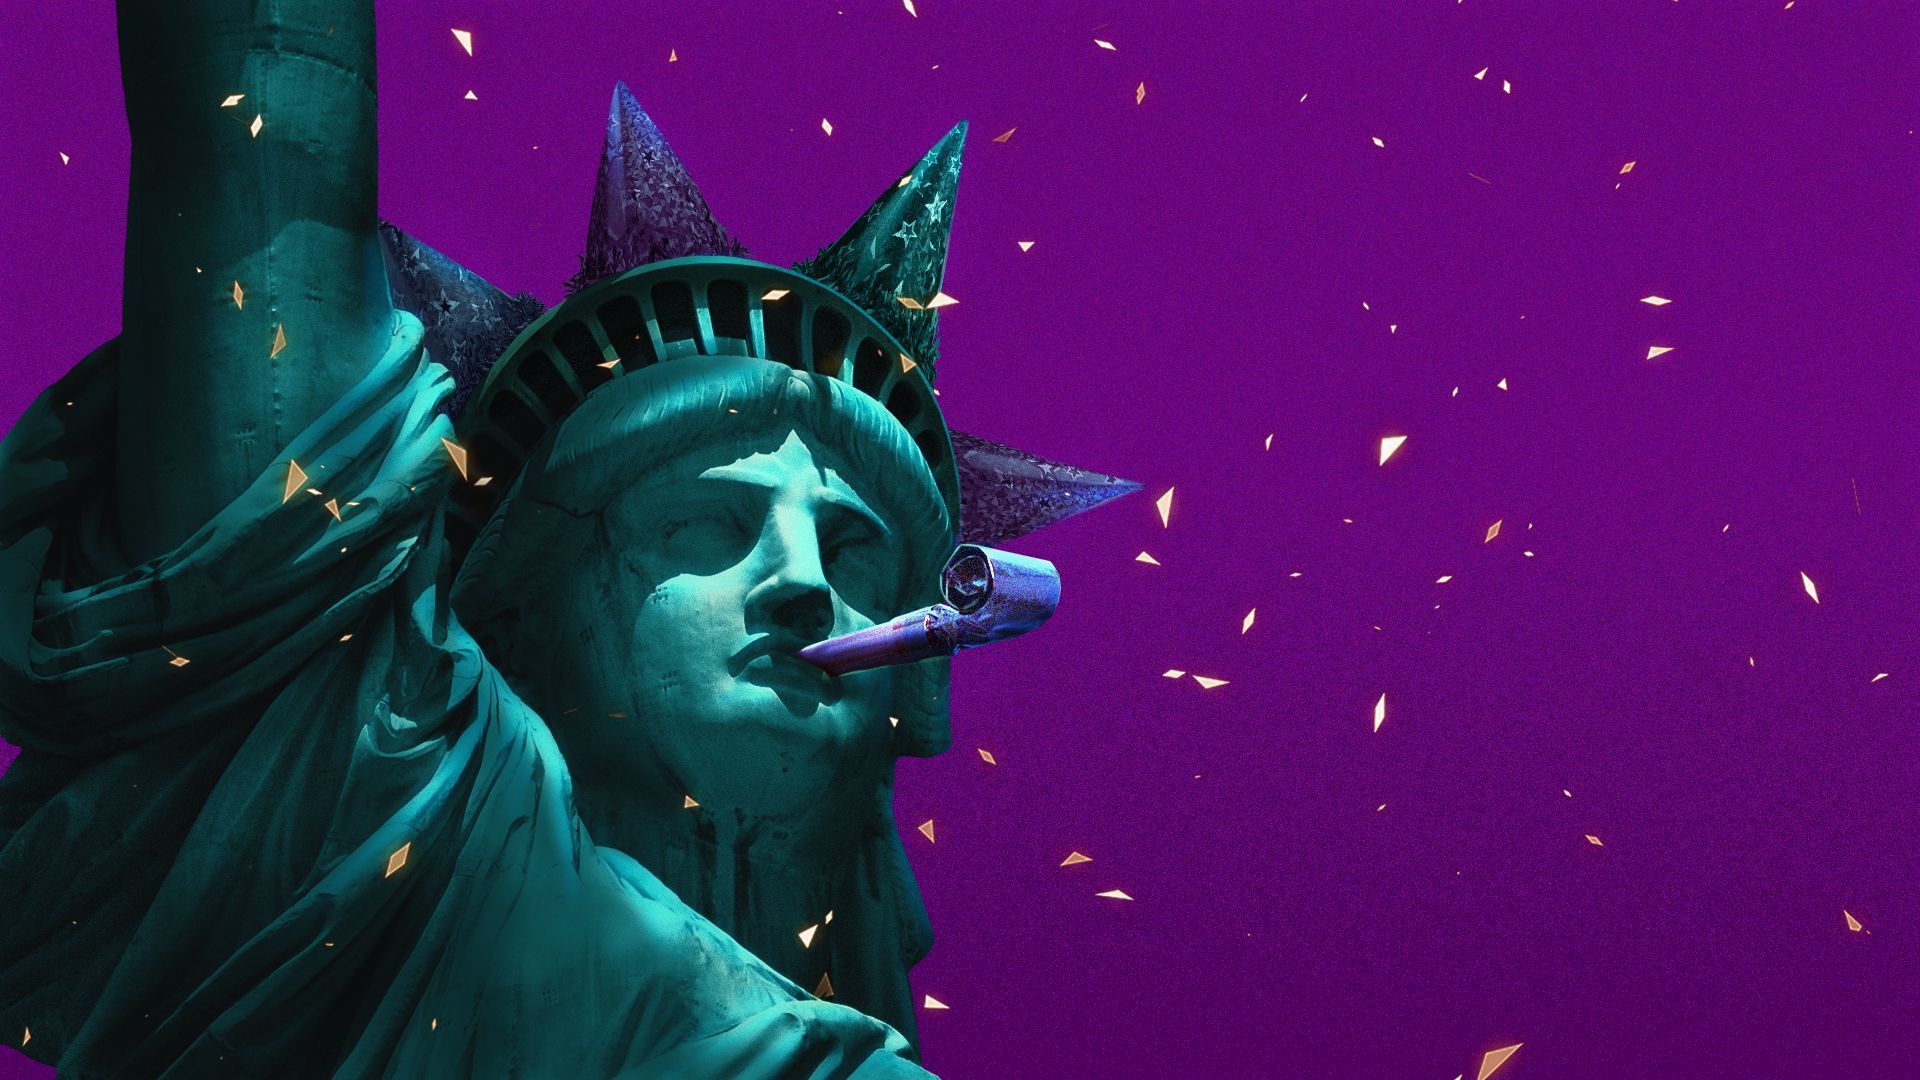 Illustration of the Statue of Liberty wearing party hats and confetti falling. 